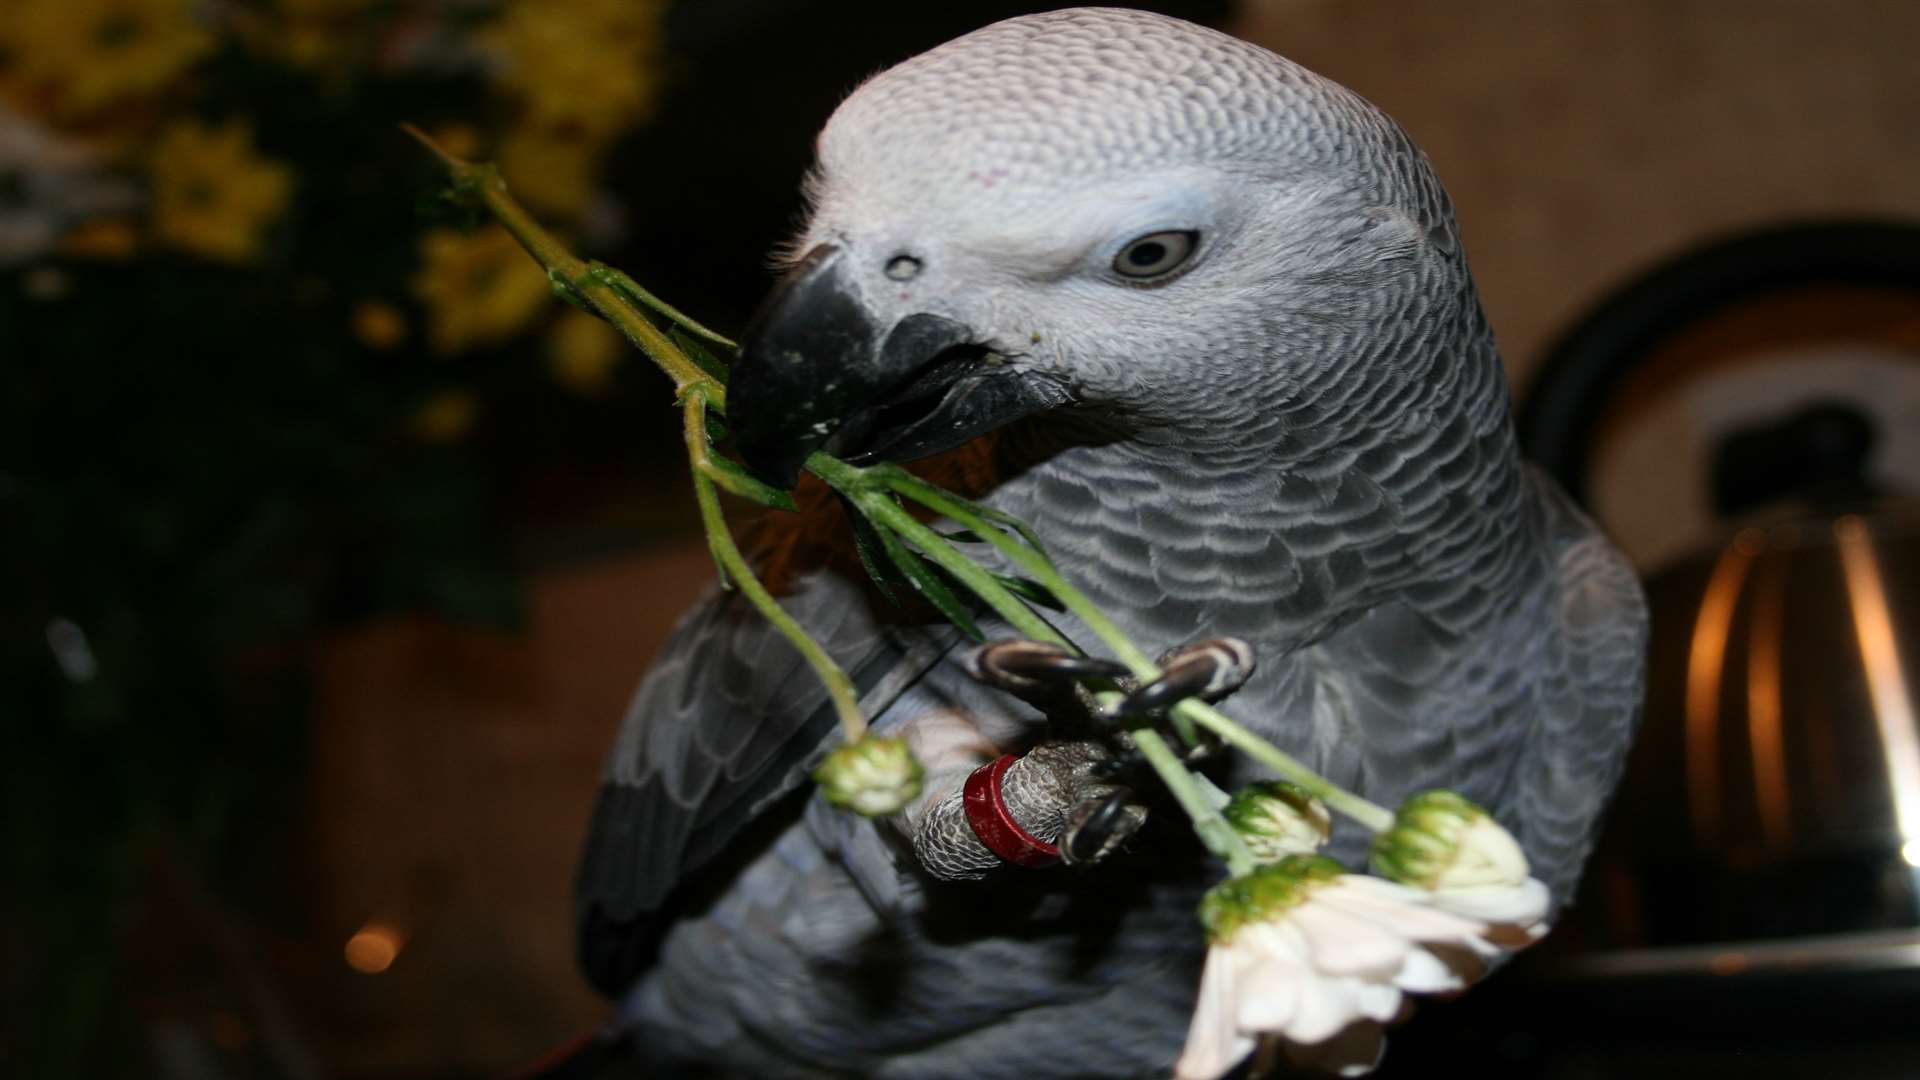 African grey parrot Molly was blown away in high winds